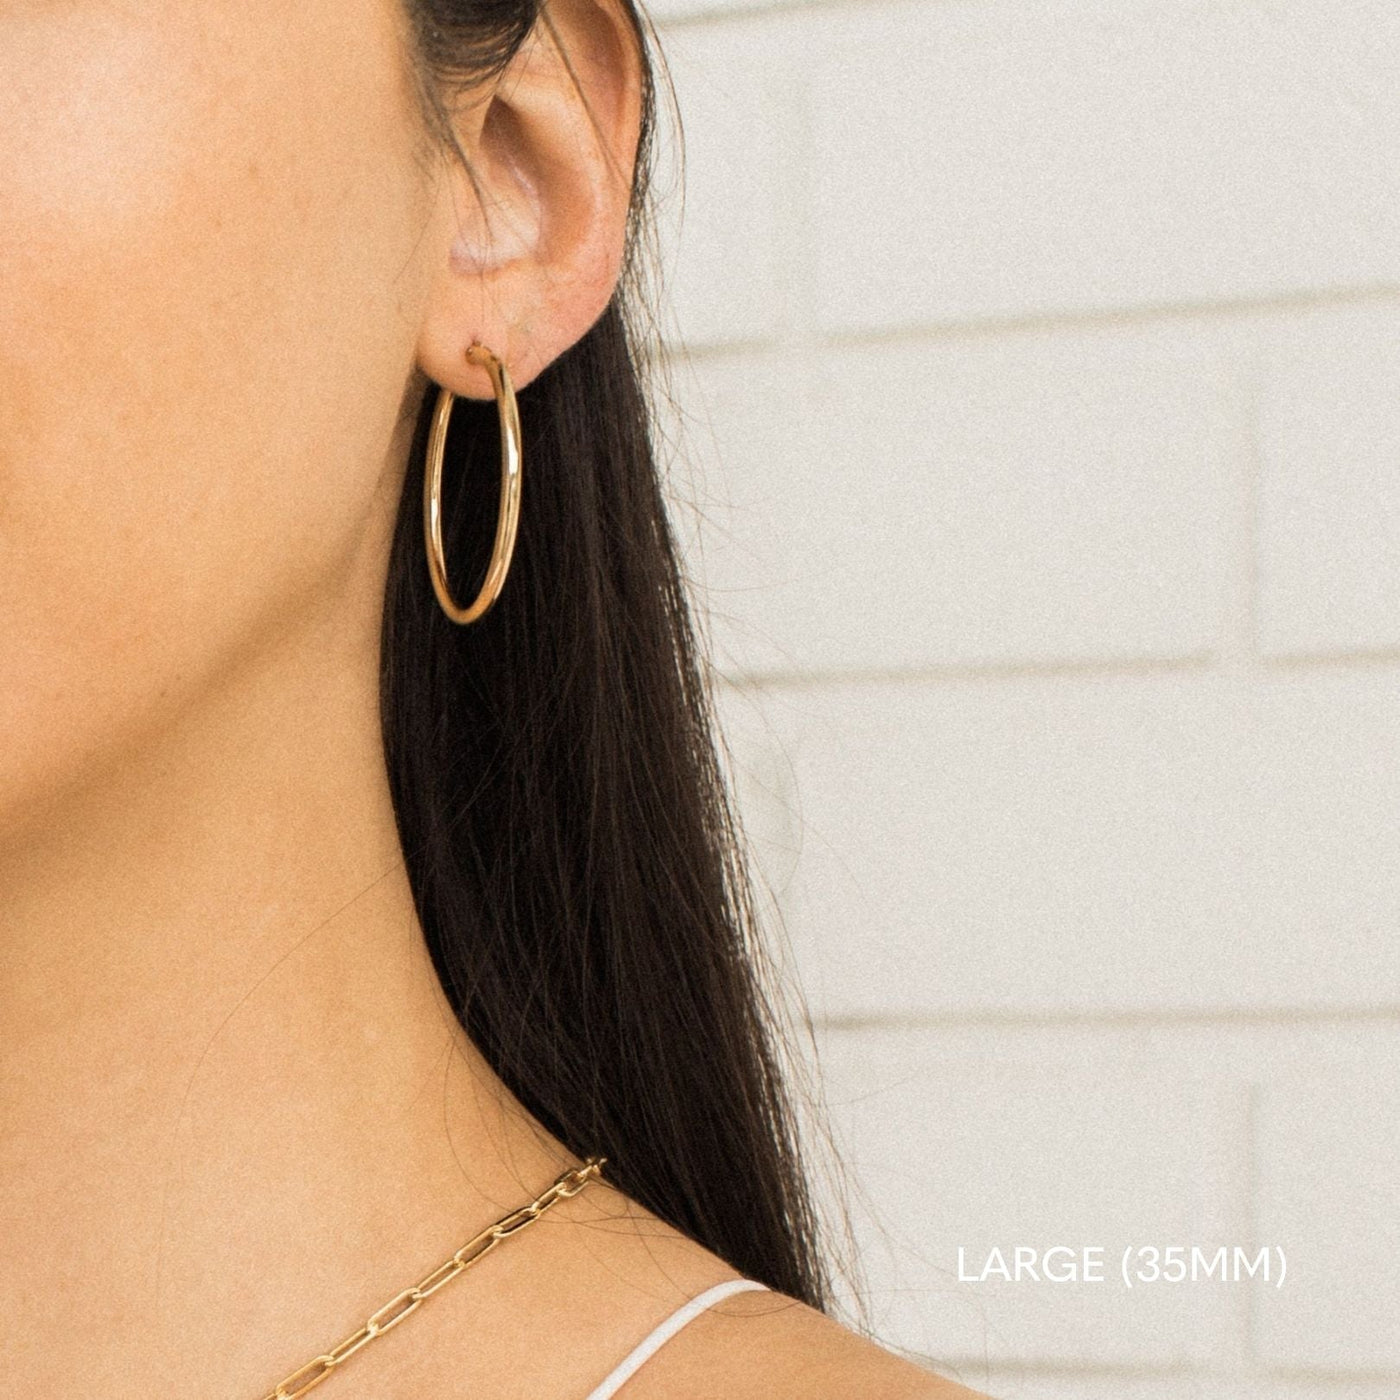 Small (13mm) Medium (22mm) Large (35mm) X-Large (50mm), Everyday Hoop Earrings by Simple & Dainty Jewelry